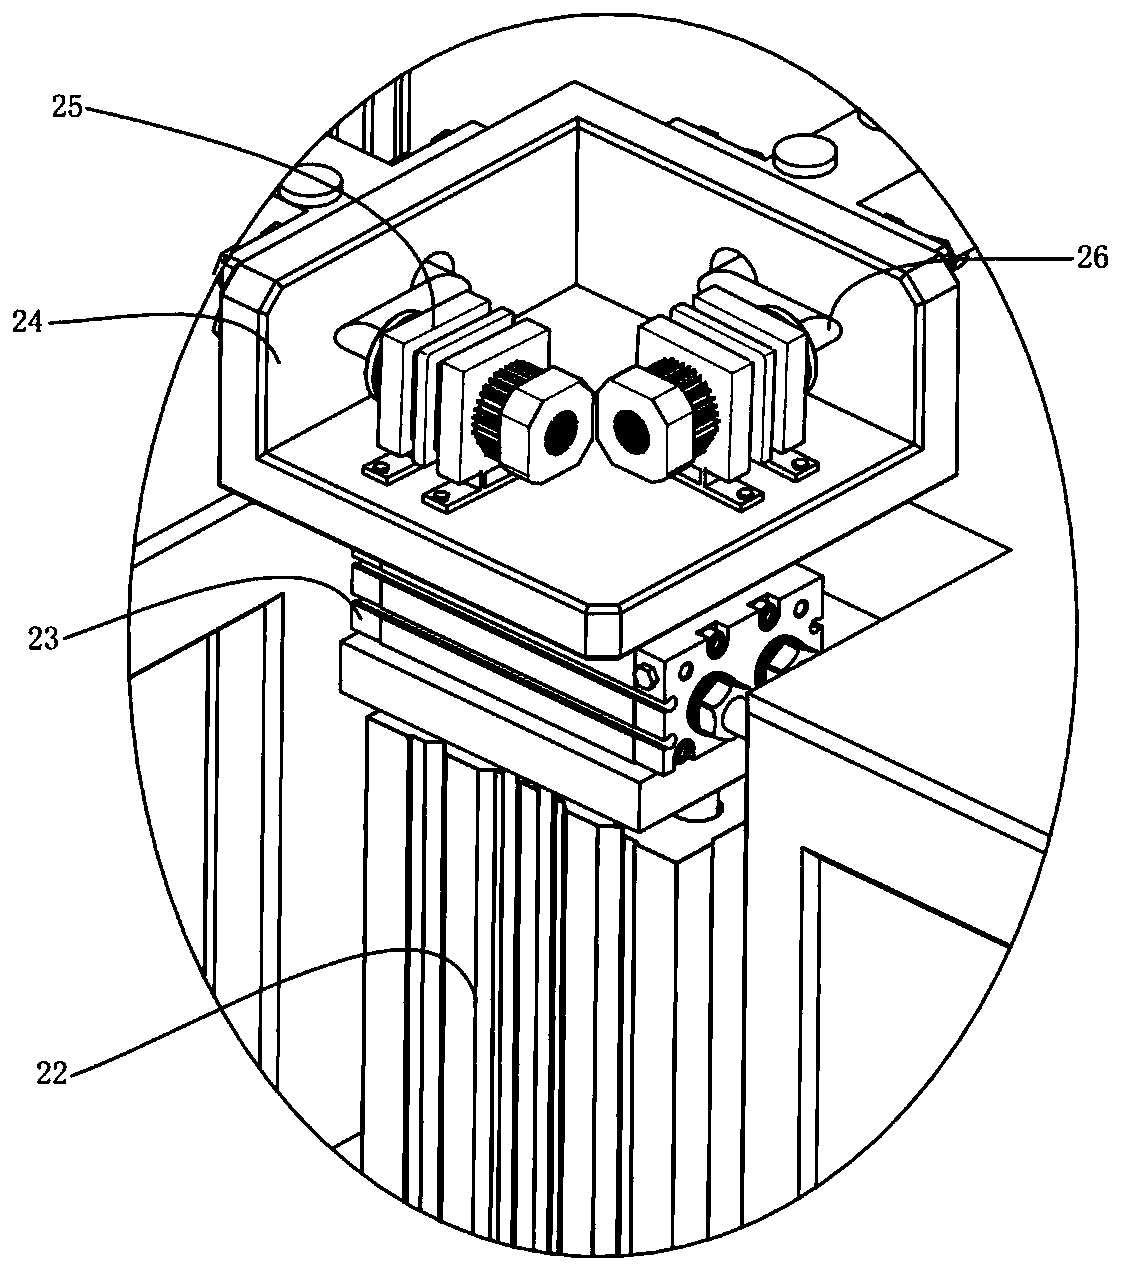 Aluminum-wood sectional material assembling device and method thereof